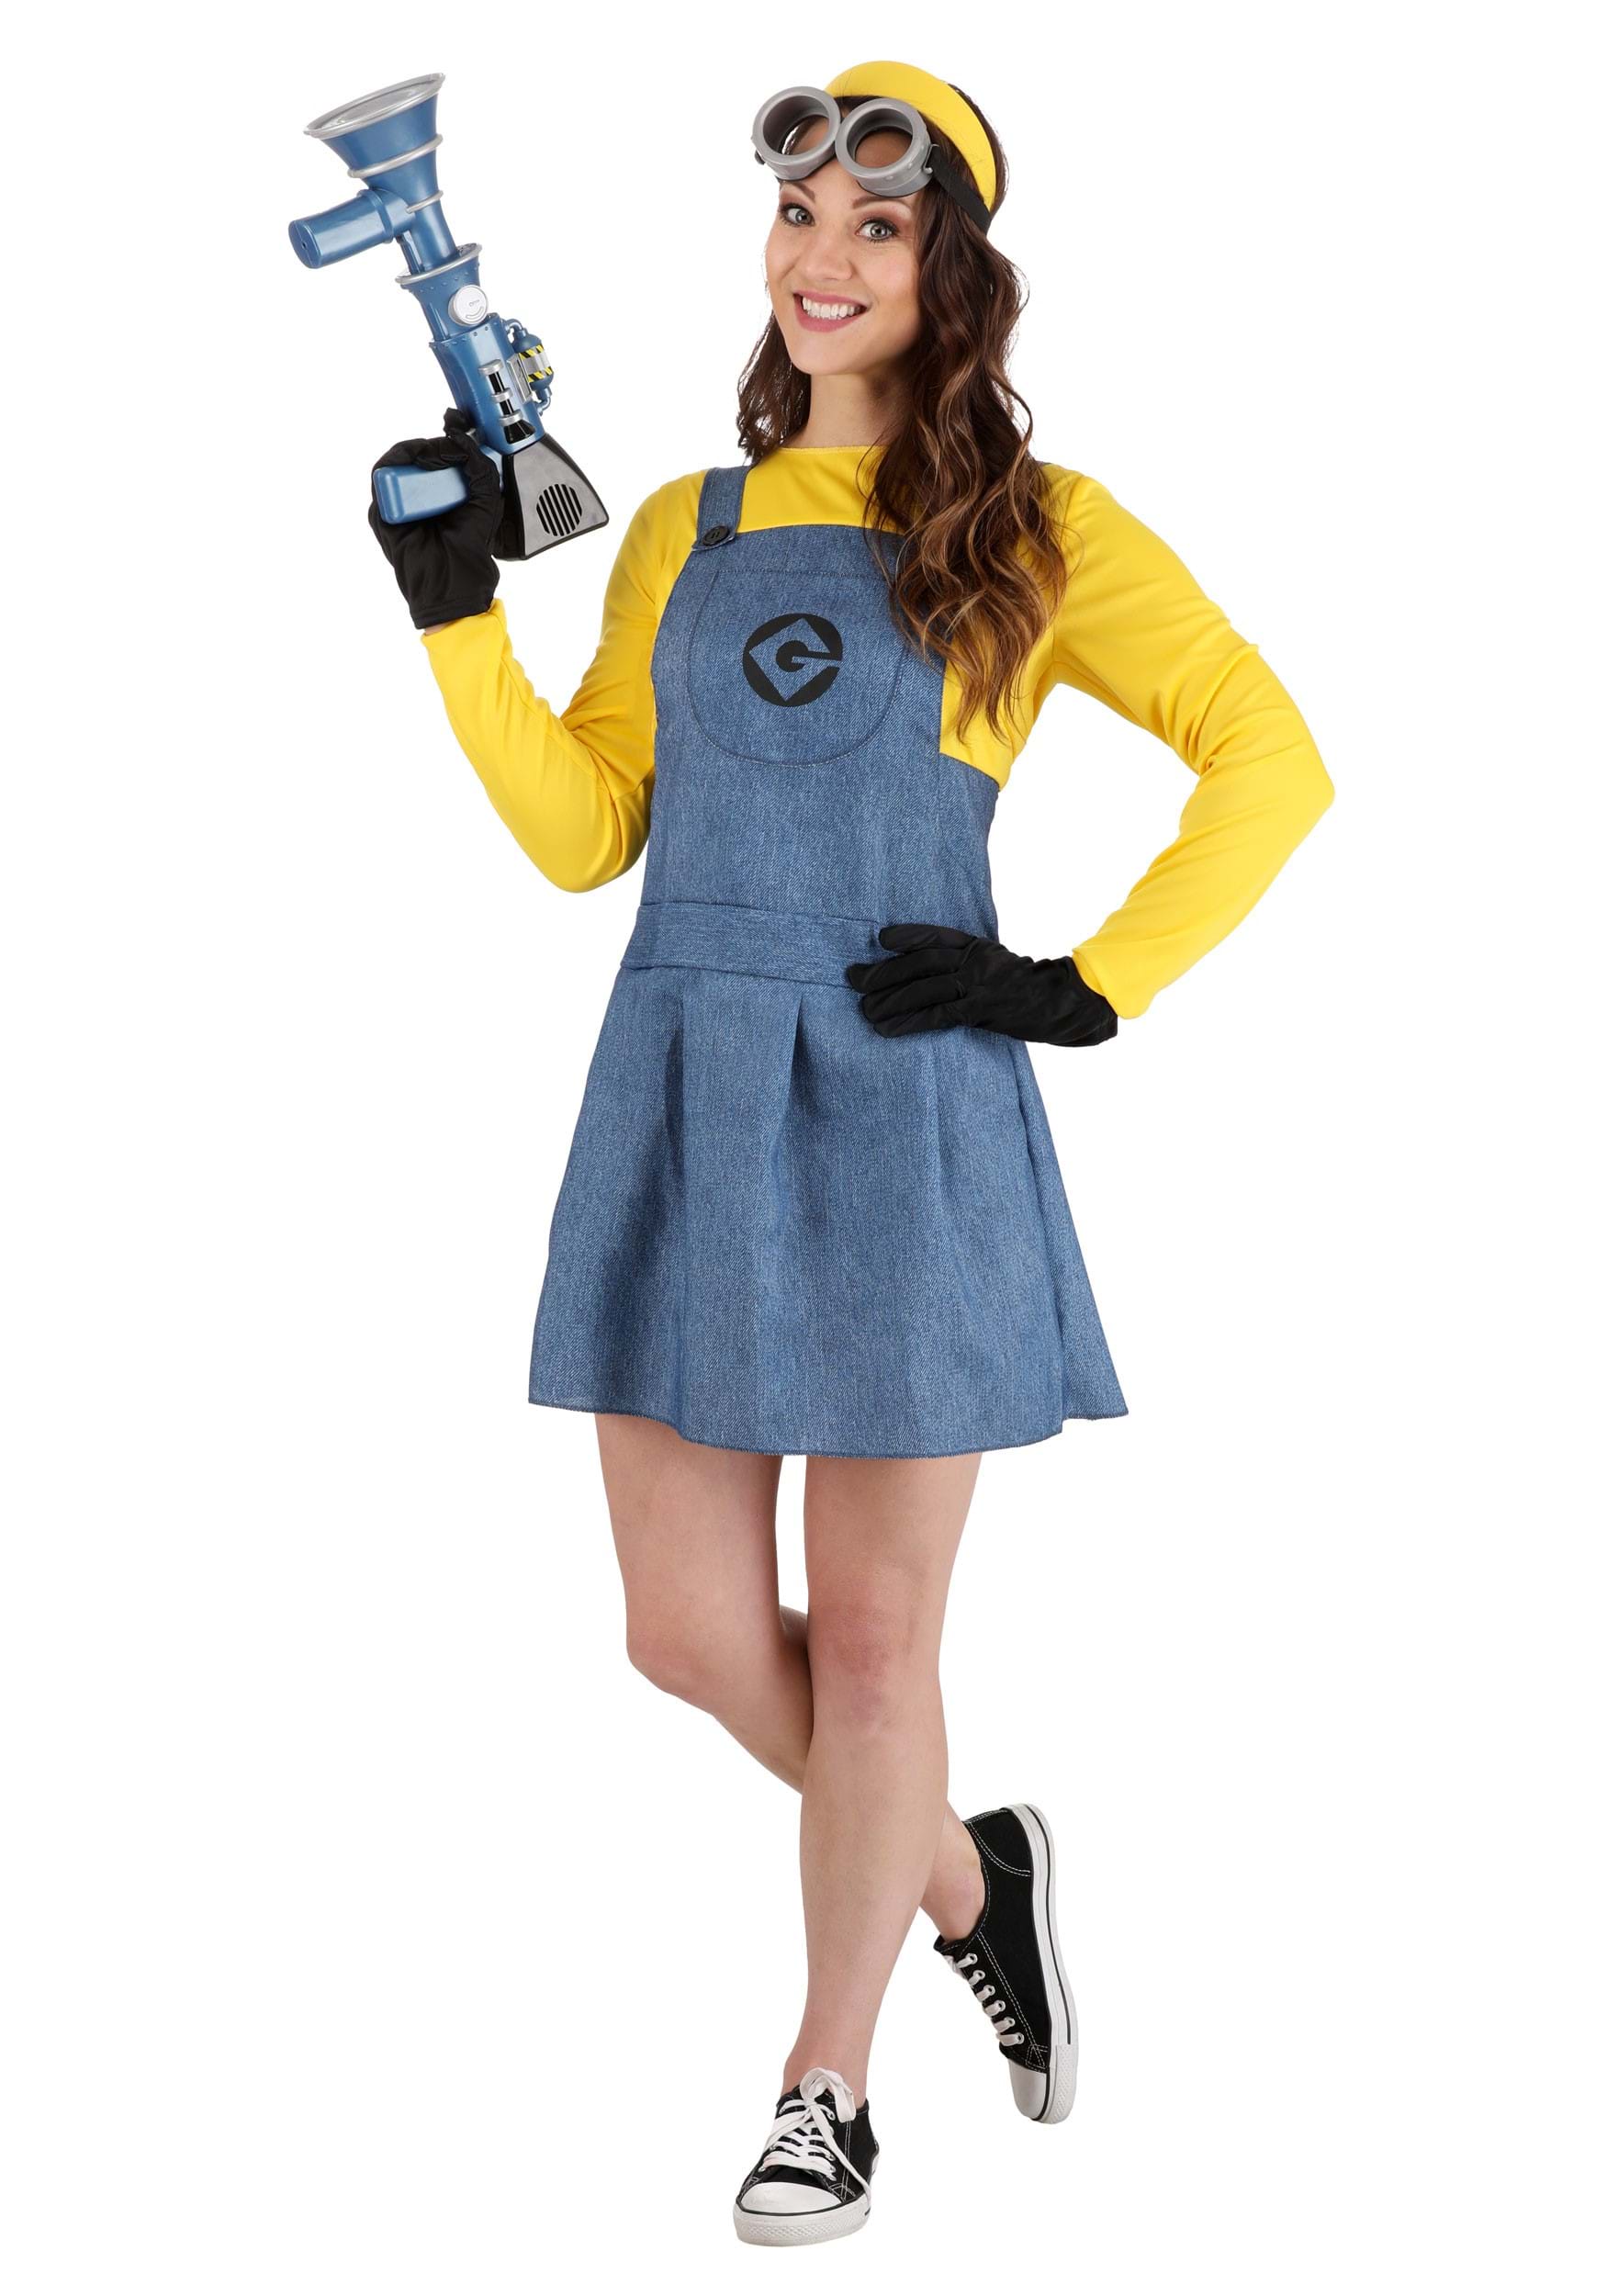 https://images.halloweencostumes.ca/products/65165/1-1/womens-minion-costume-0.JPG